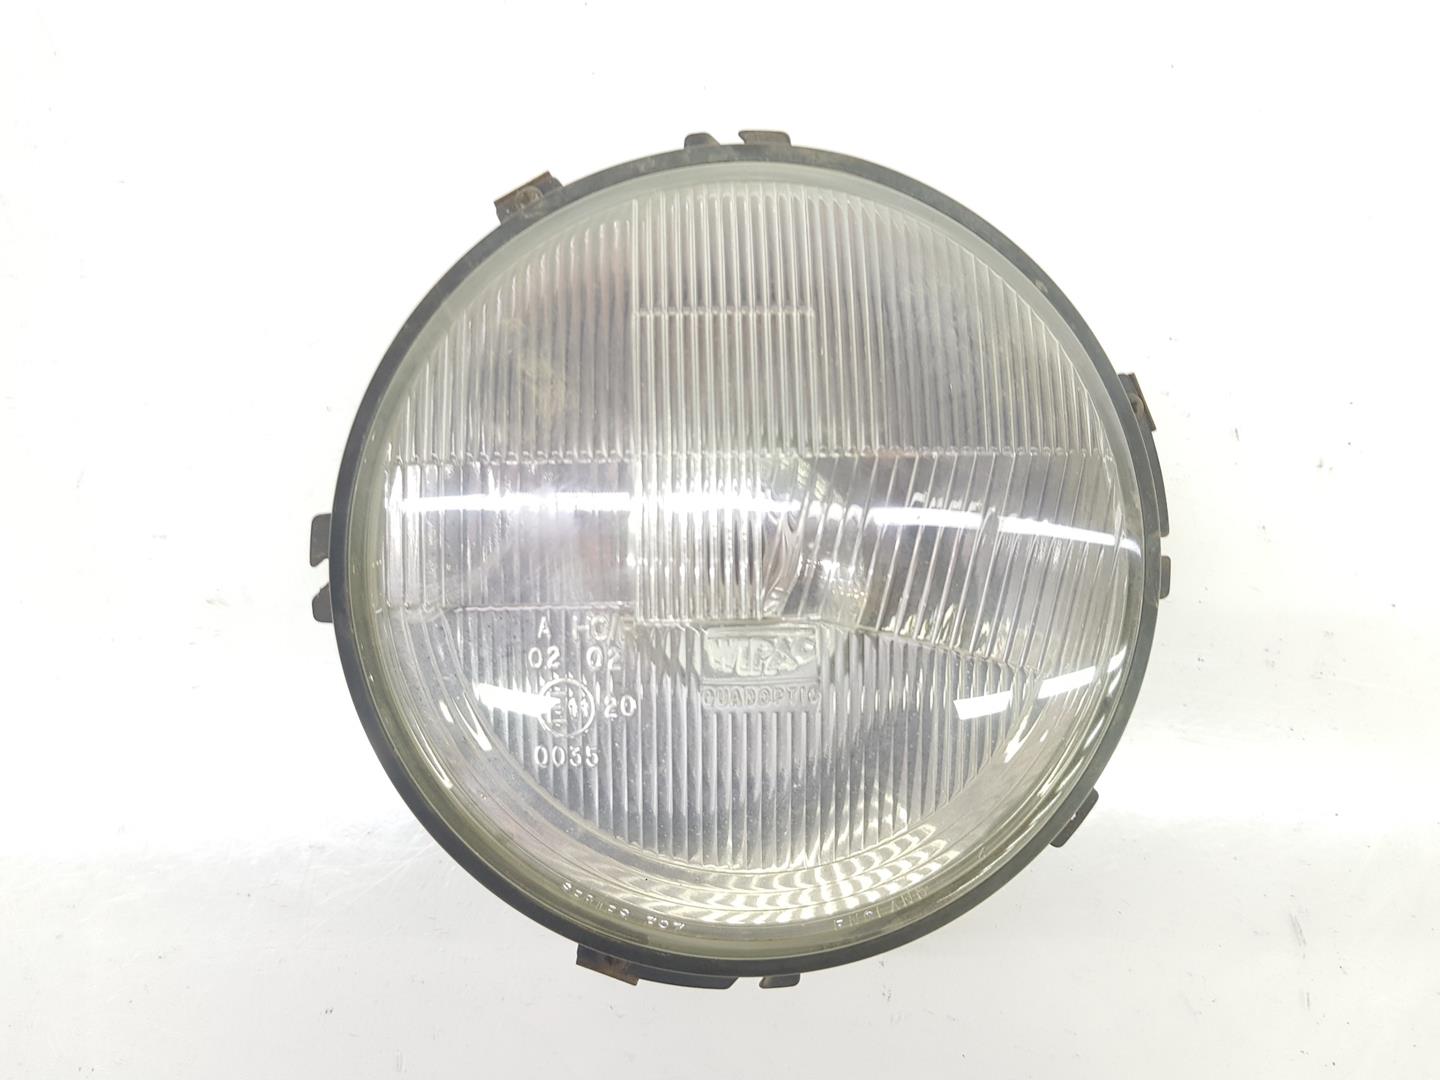 LAND ROVER Defender 1 generation (1983-2016) Front Left Headlight STC1210, STC1210 19816523